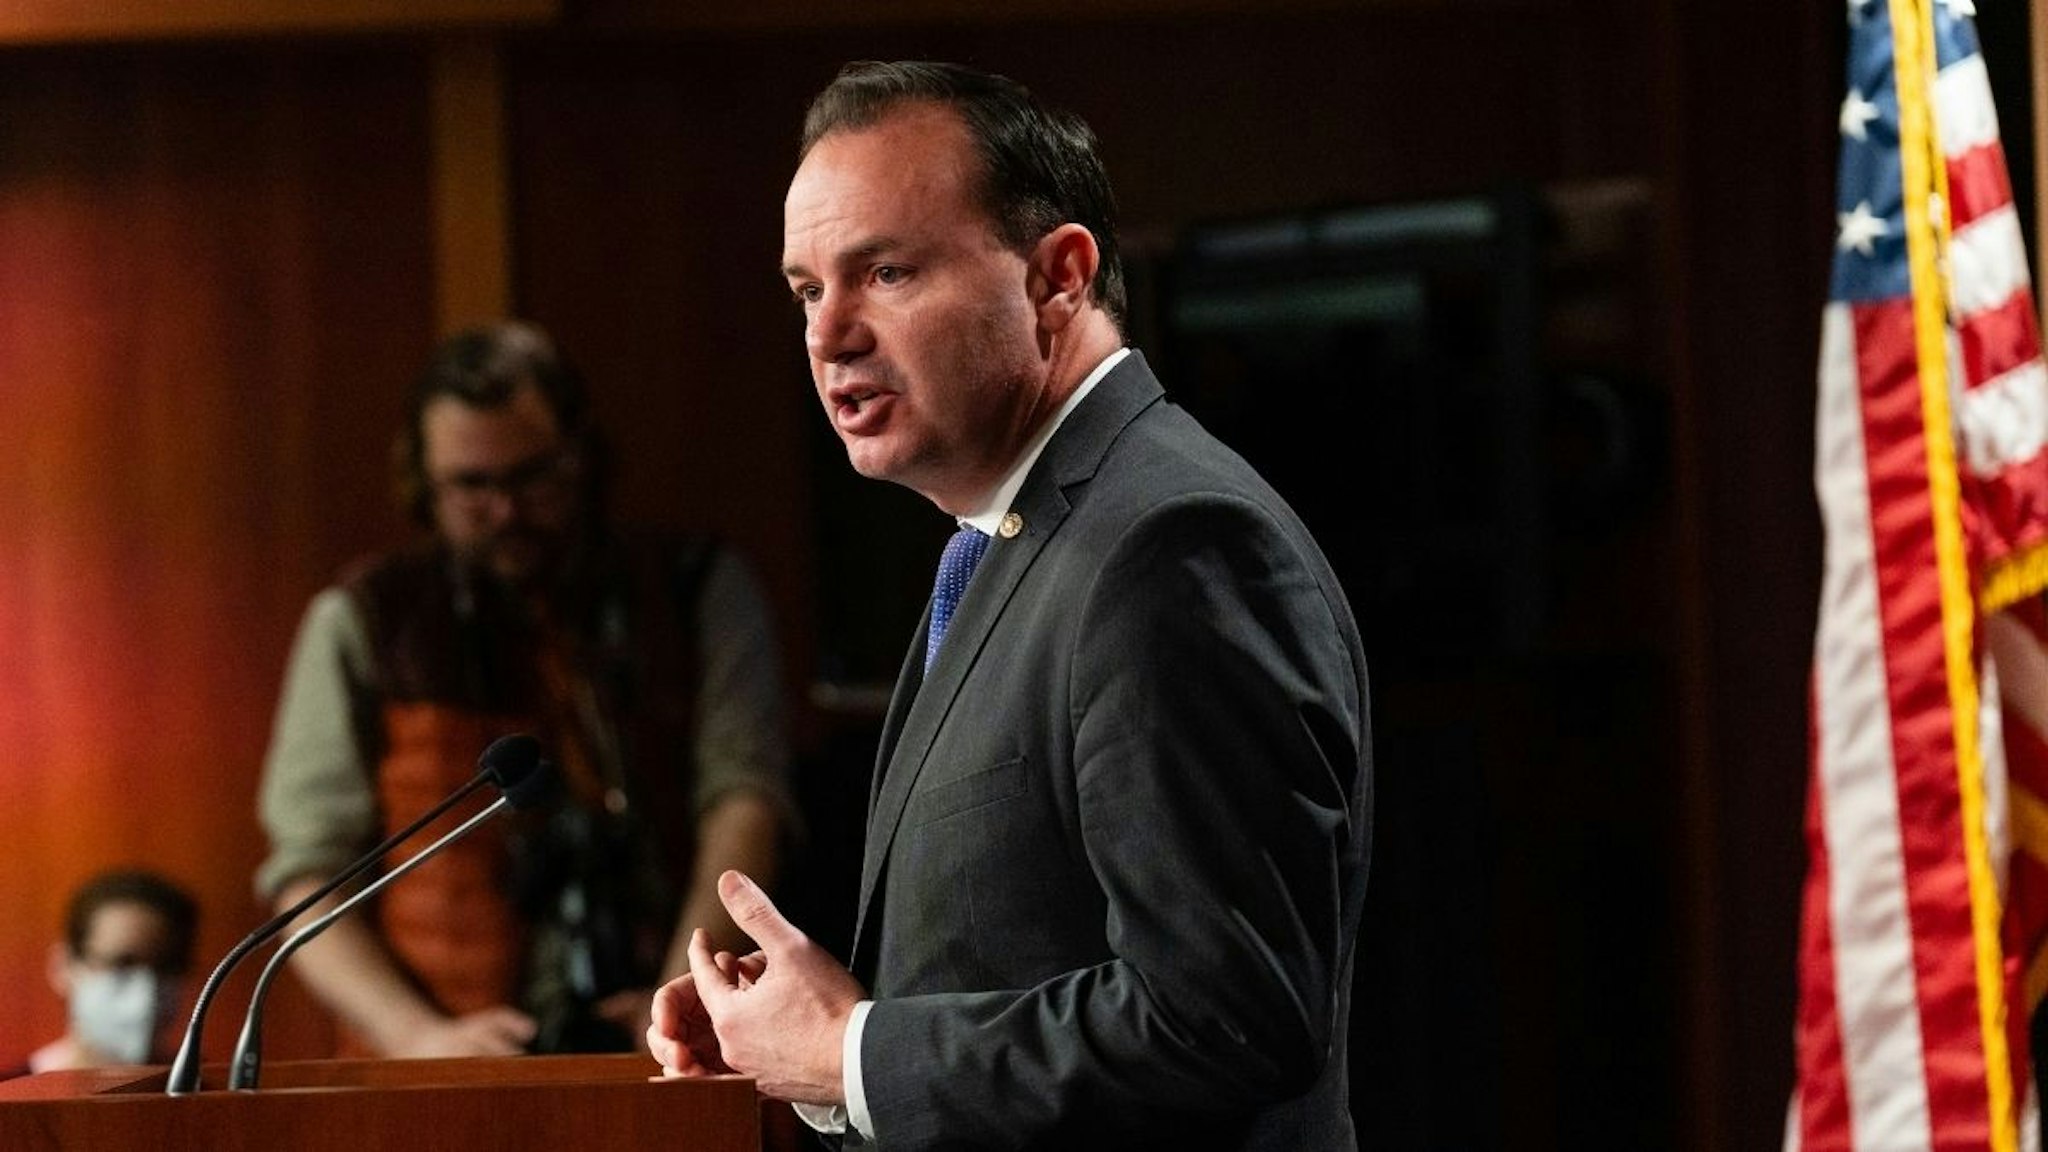 Senator Mike Lee, a Republican from Utah, speaks during a news conference about the nomination of Ketanji Brown Jackson, associate justice of the U.S. Supreme Court nominee for U.S. President Joe Biden, at the U.S. Capitol in Washington, D.C., U.S., on Thursday, April 7, 2022.